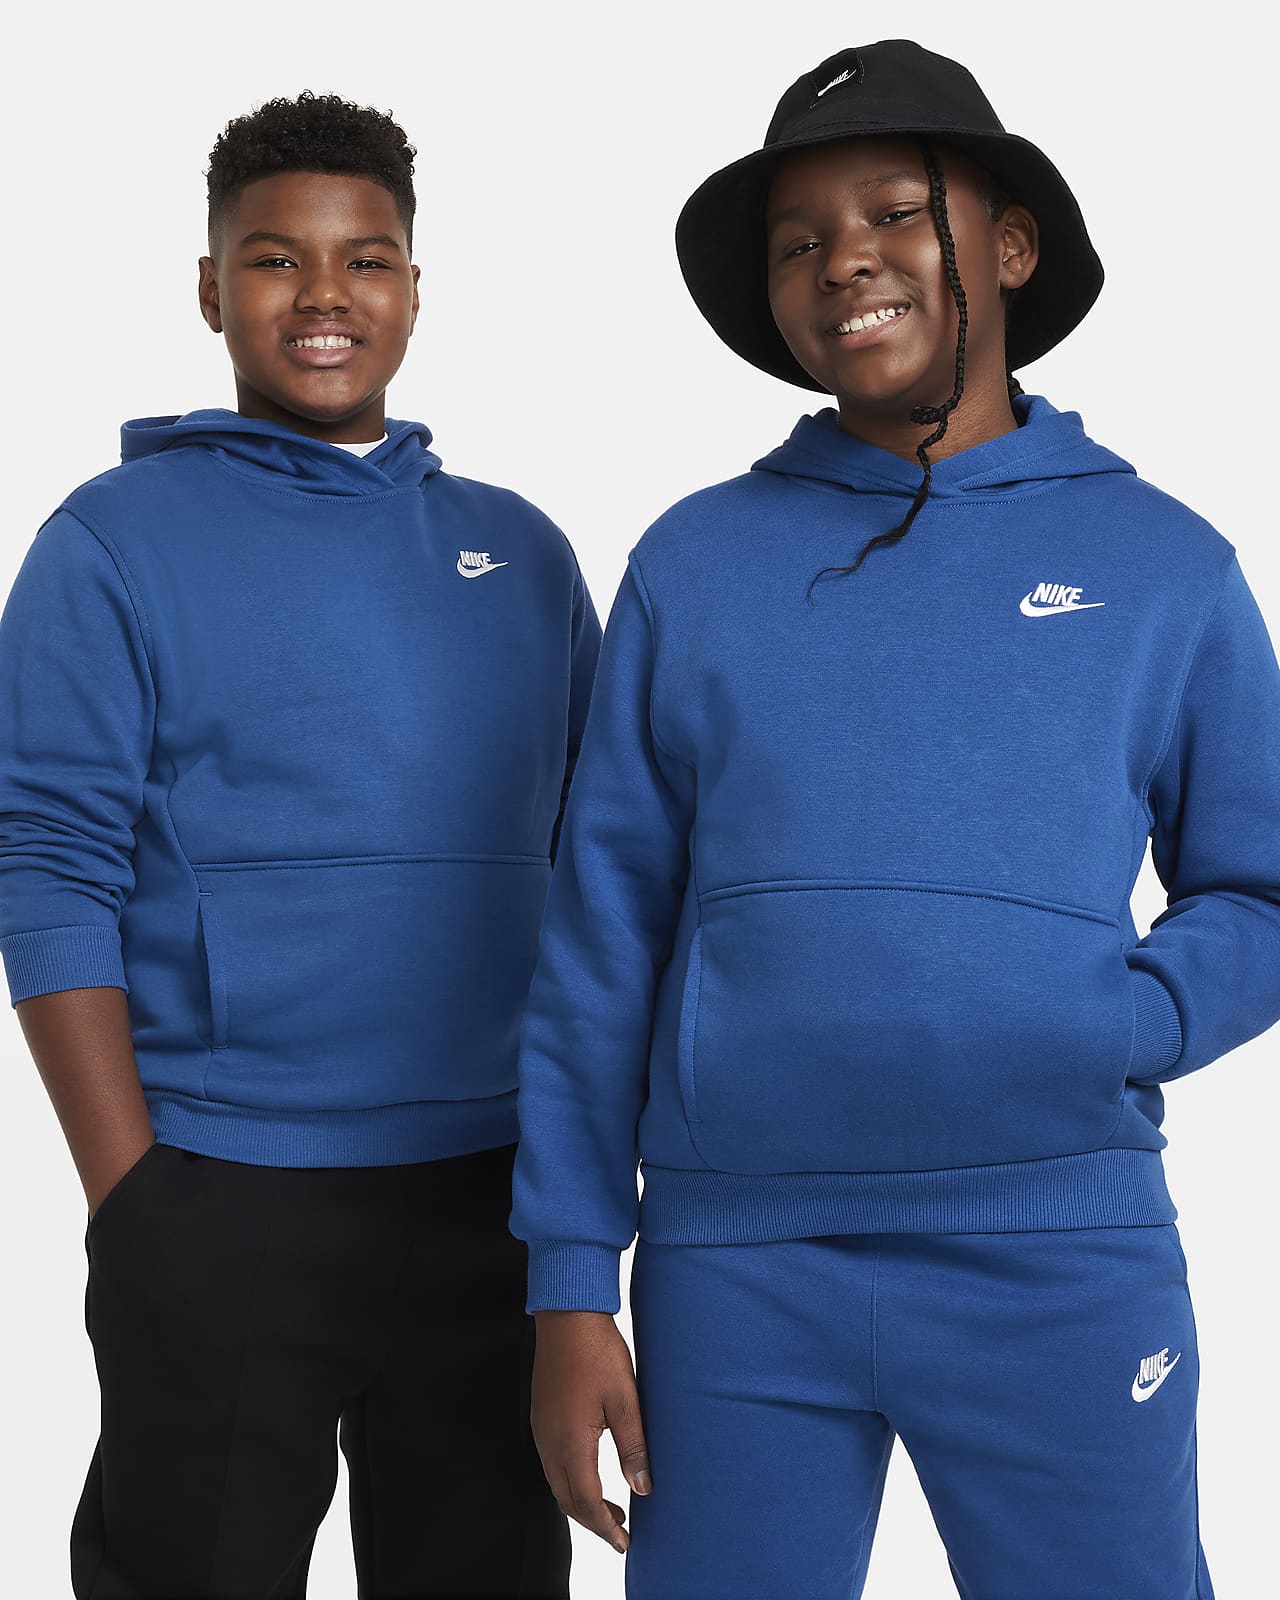 https://static.nike.com/a/images/t_PDP_1280_v1/f_auto,q_auto:eco/bf79fc93-1ac6-44eb-9d92-c1581159498f/sportswear-club-fleece-older-pullover-hoodie-tZvB5S.png